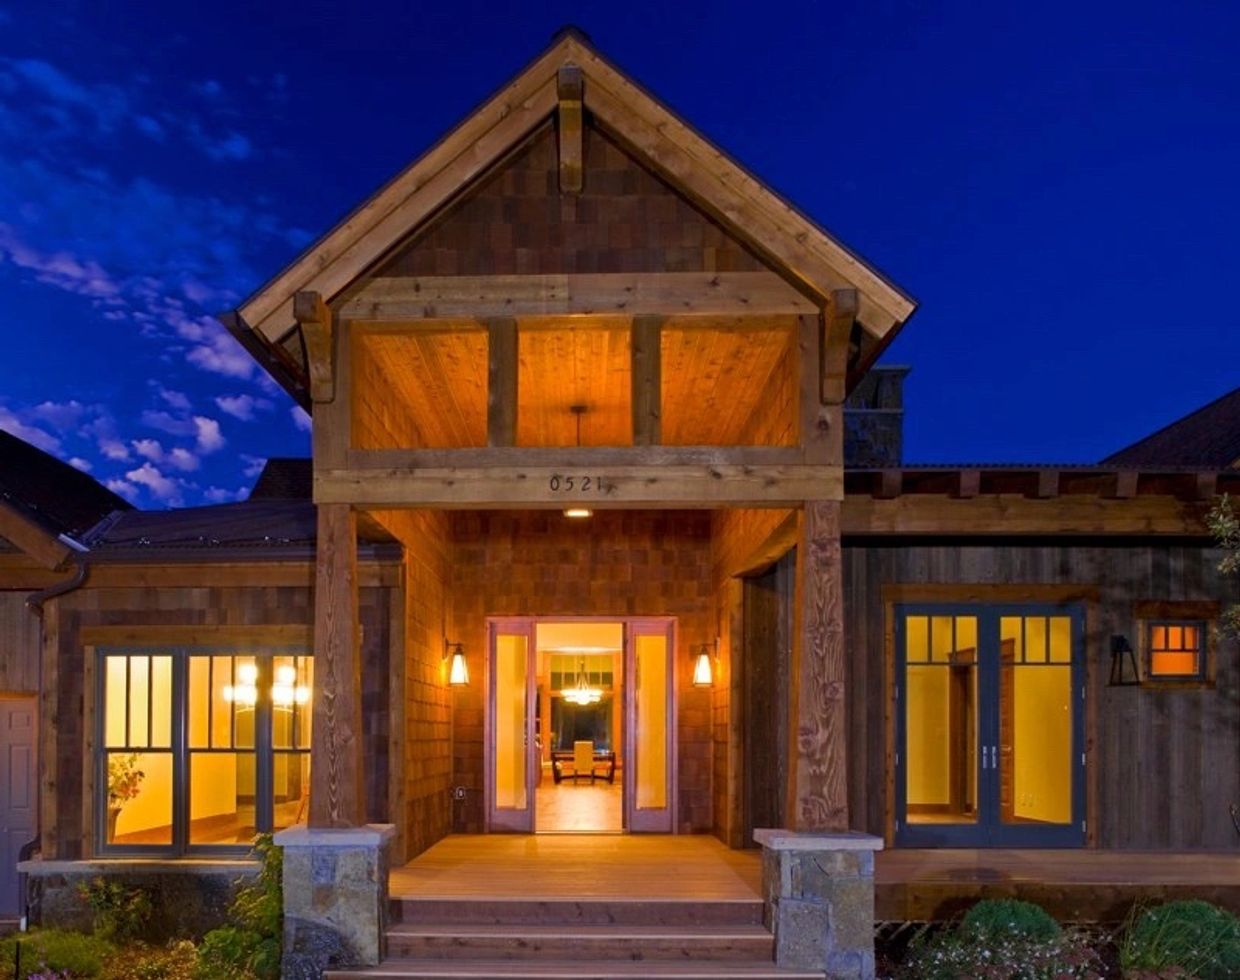 This is a contemporary mountain home designed by a residential architect in carbondale, colorado. 